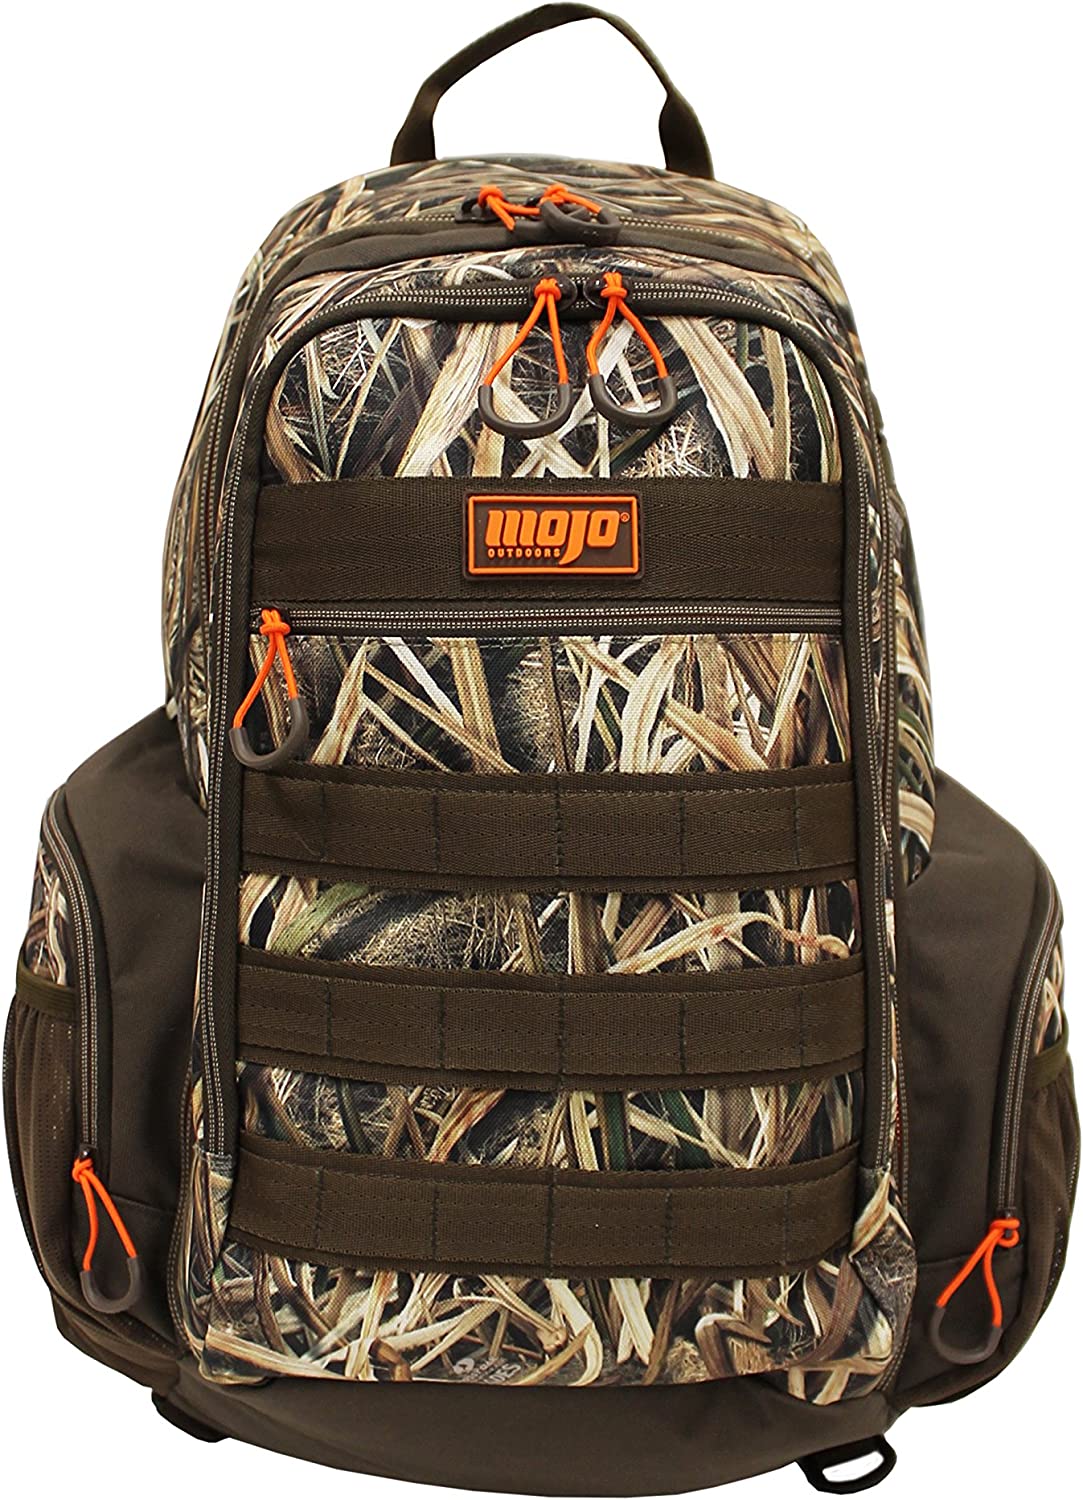 https://www.prochasse.fr/wp-content/uploads/2022/10/Sac-a%CC%80-dos-de-chasse-Camouflage-MOJO-Outdoors.jpg